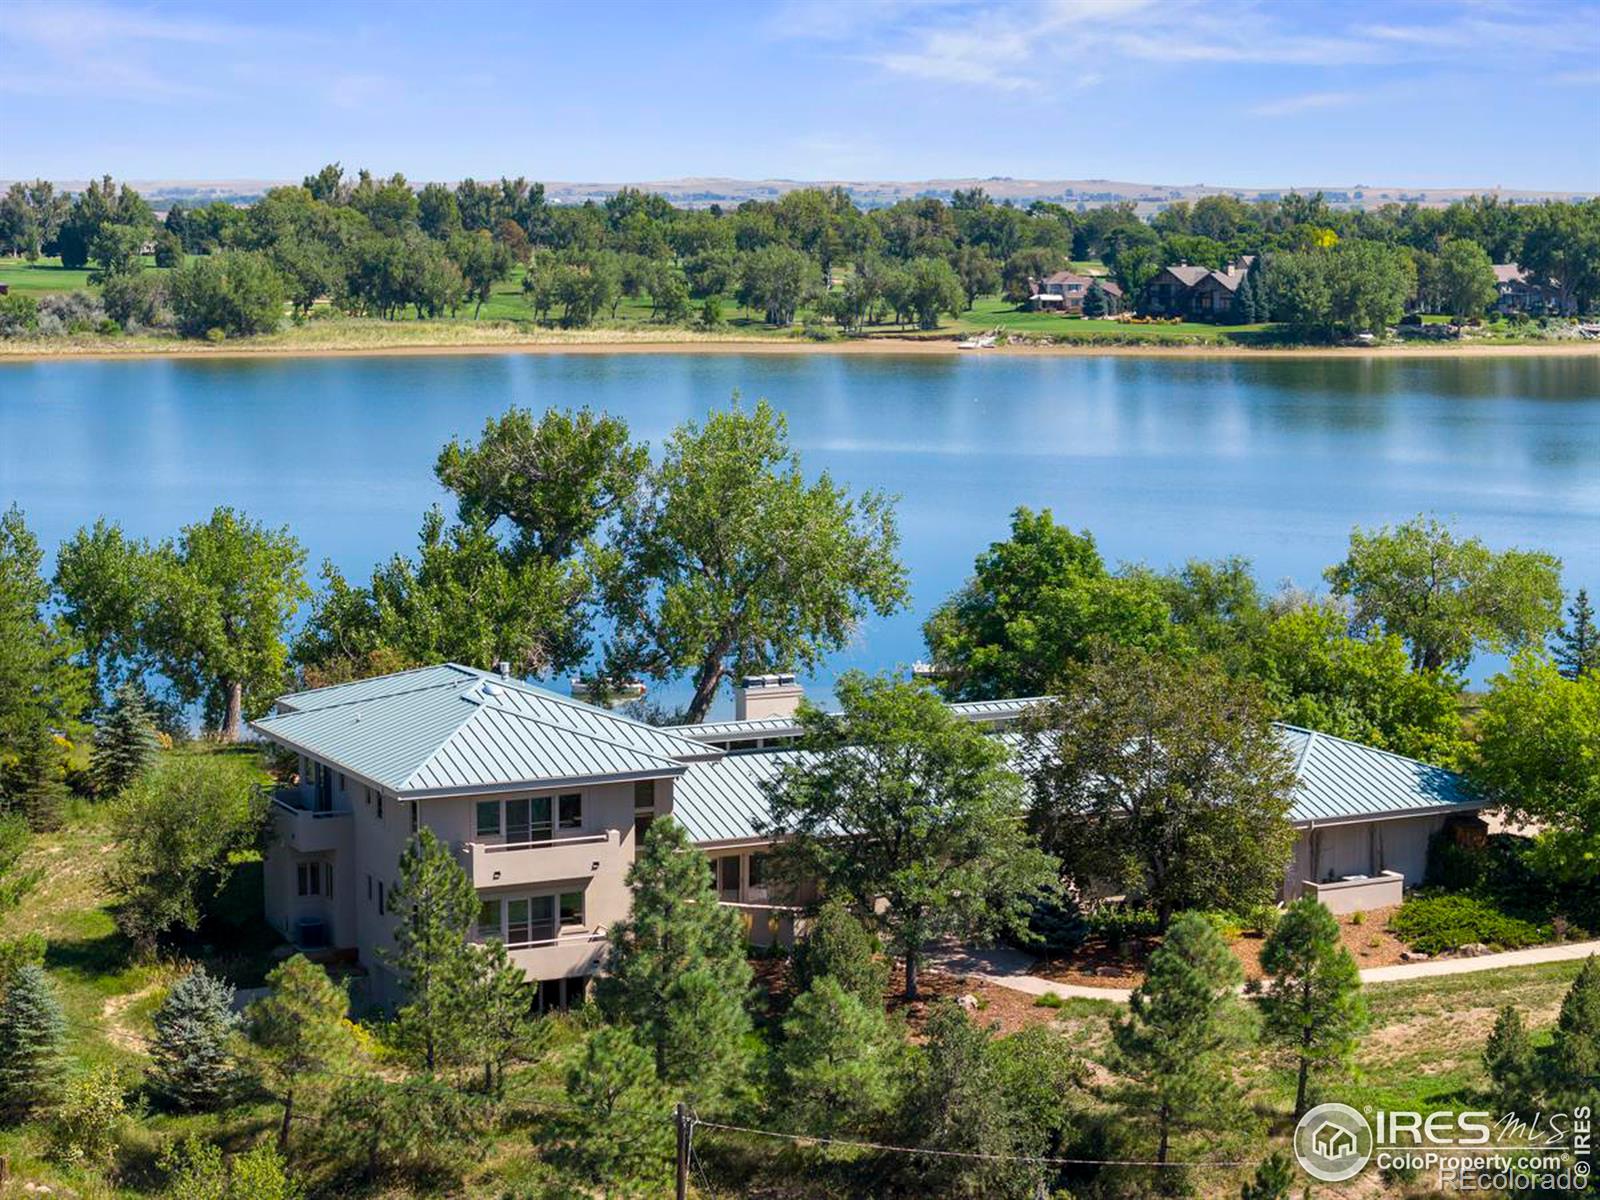 1230  Country Club Road, fort collins MLS: 4567891006664 Beds: 5 Baths: 7 Price: $2,800,000